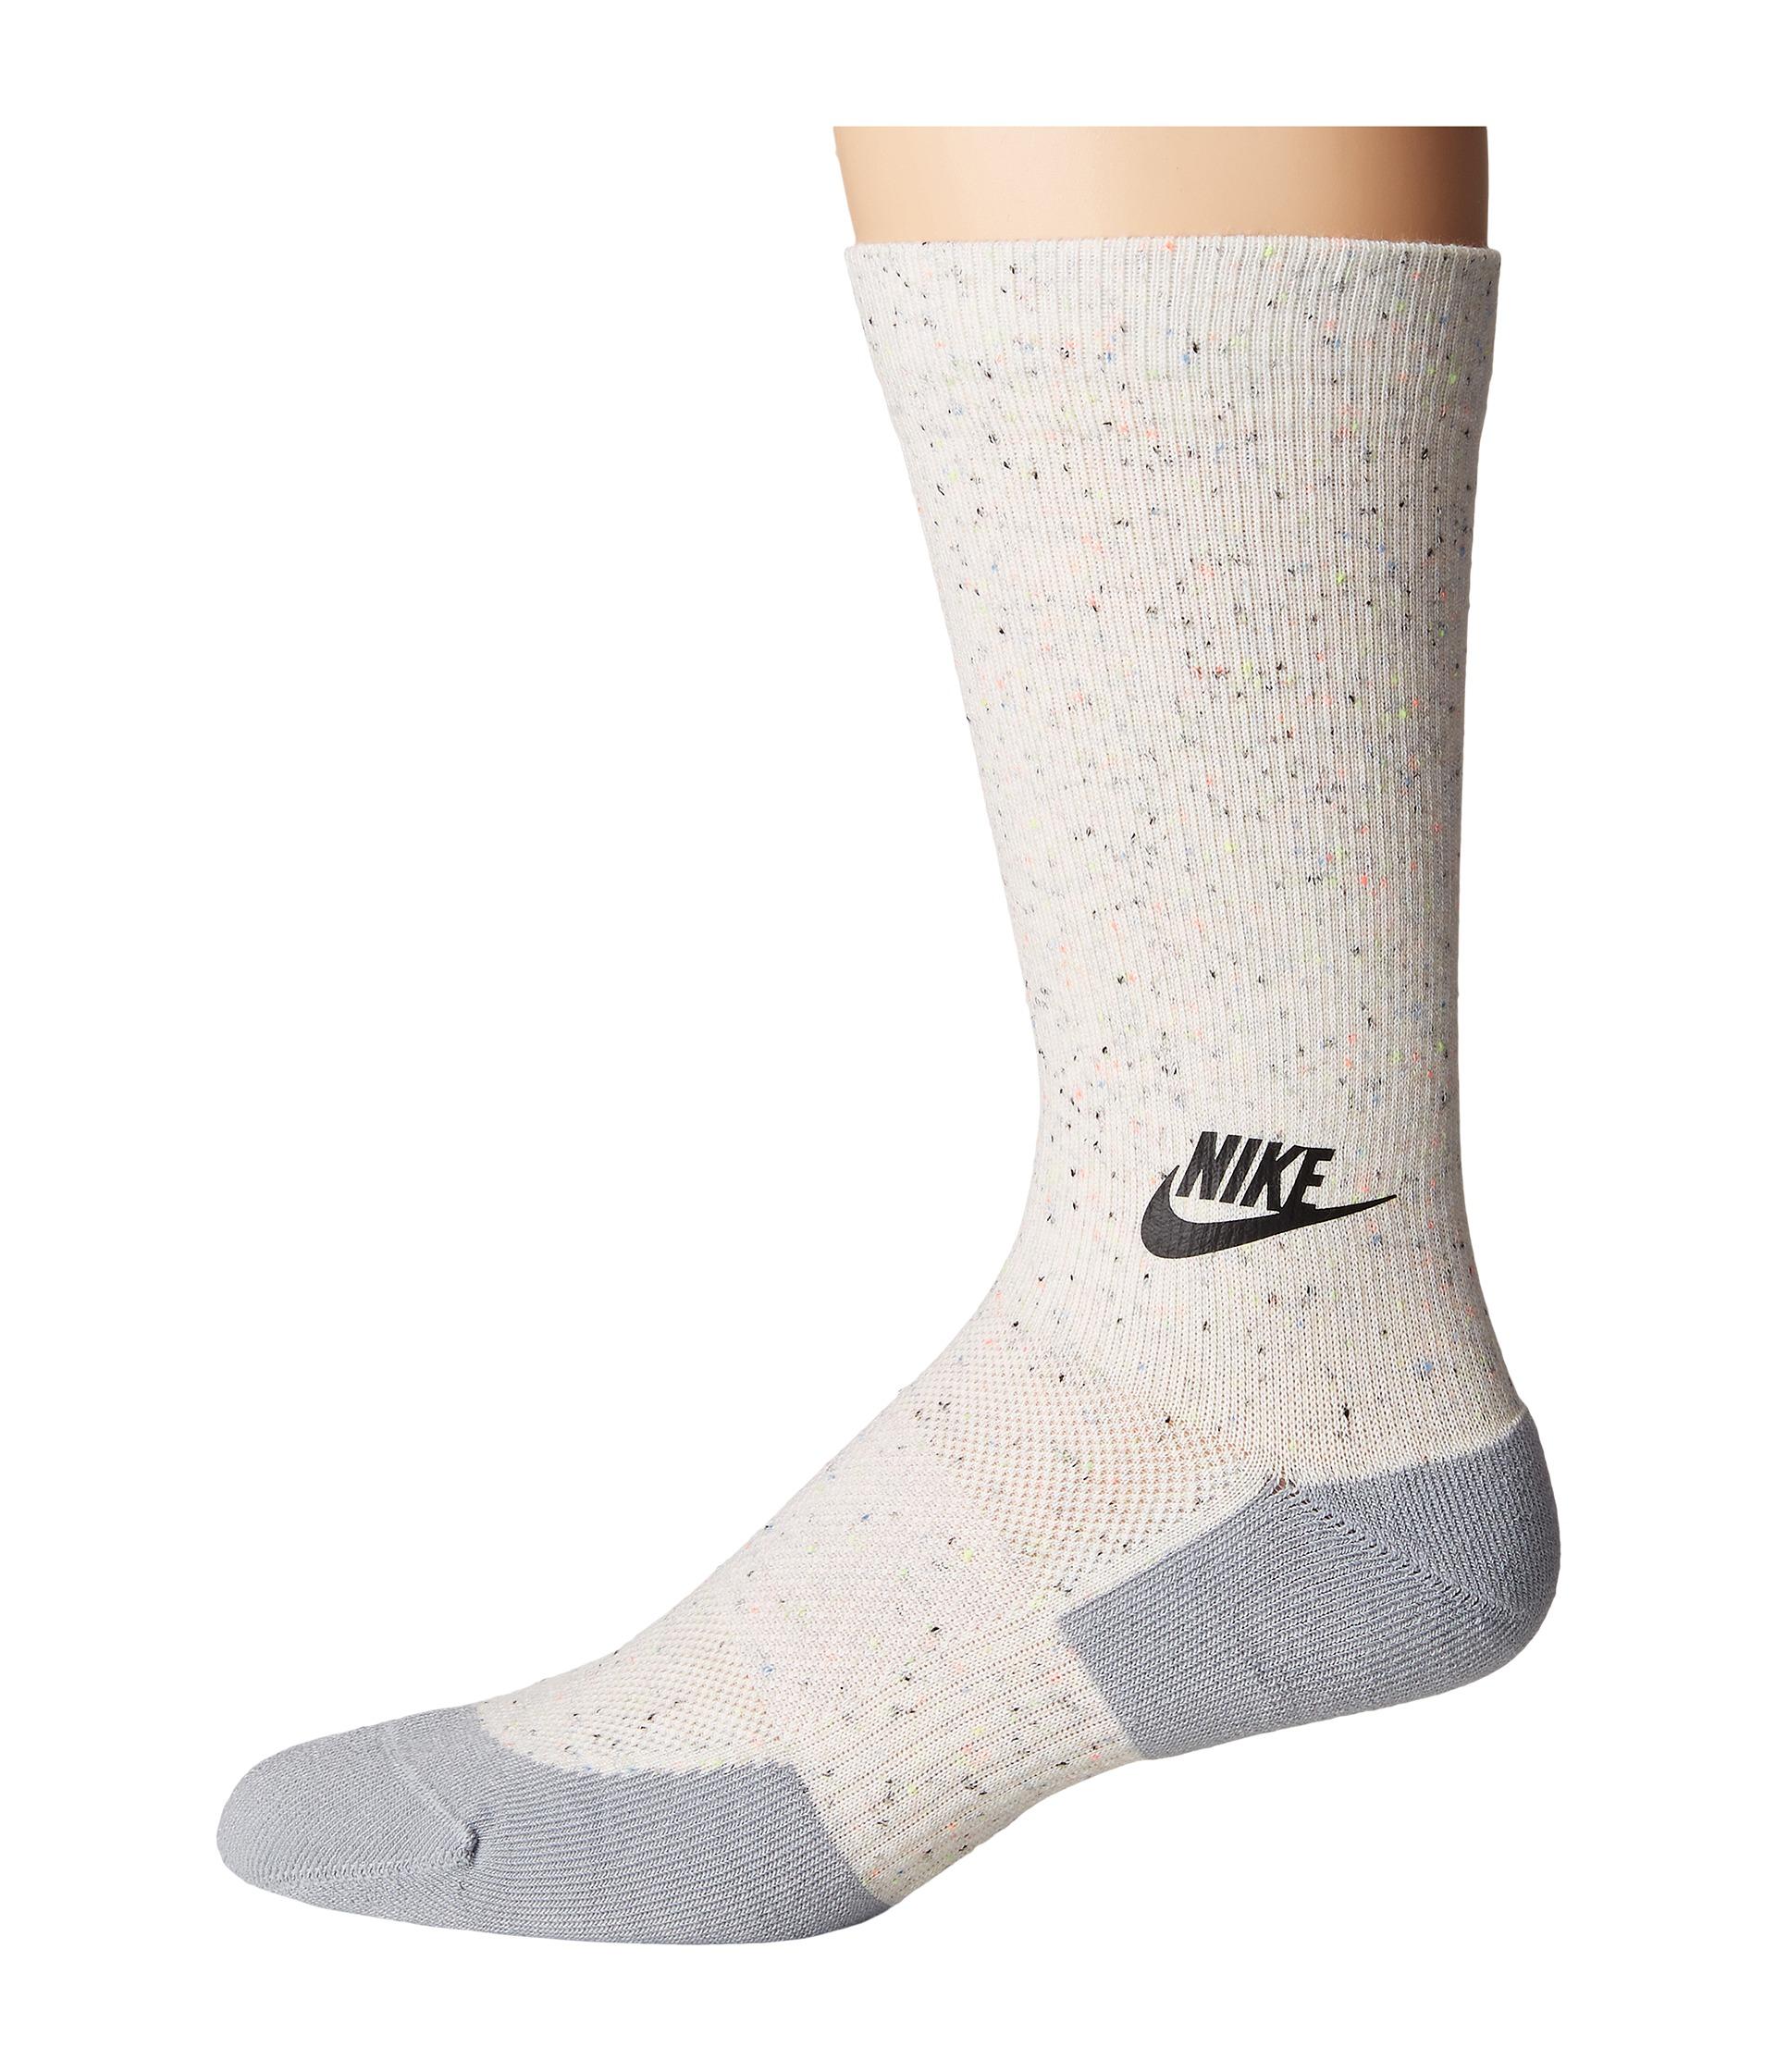 Nike Cotton Tech Pack Crew Sock in 